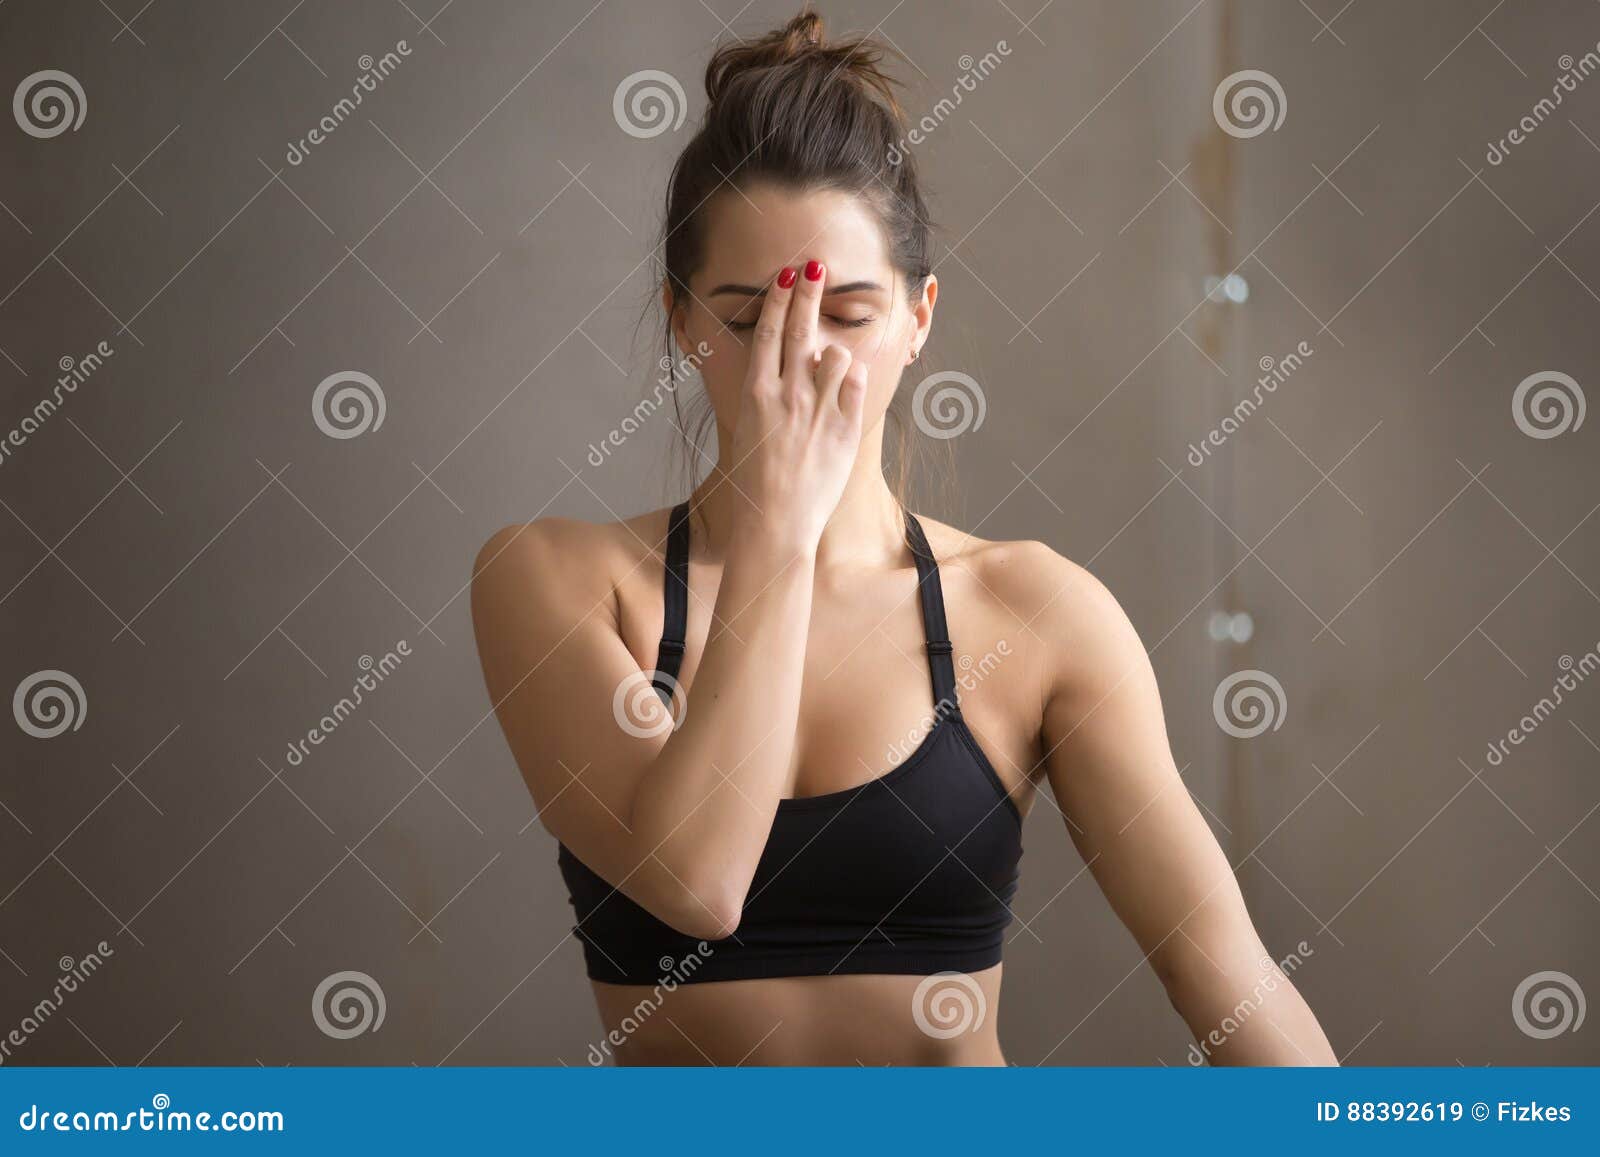 young attractive woman making alternate nostril breathing, grey